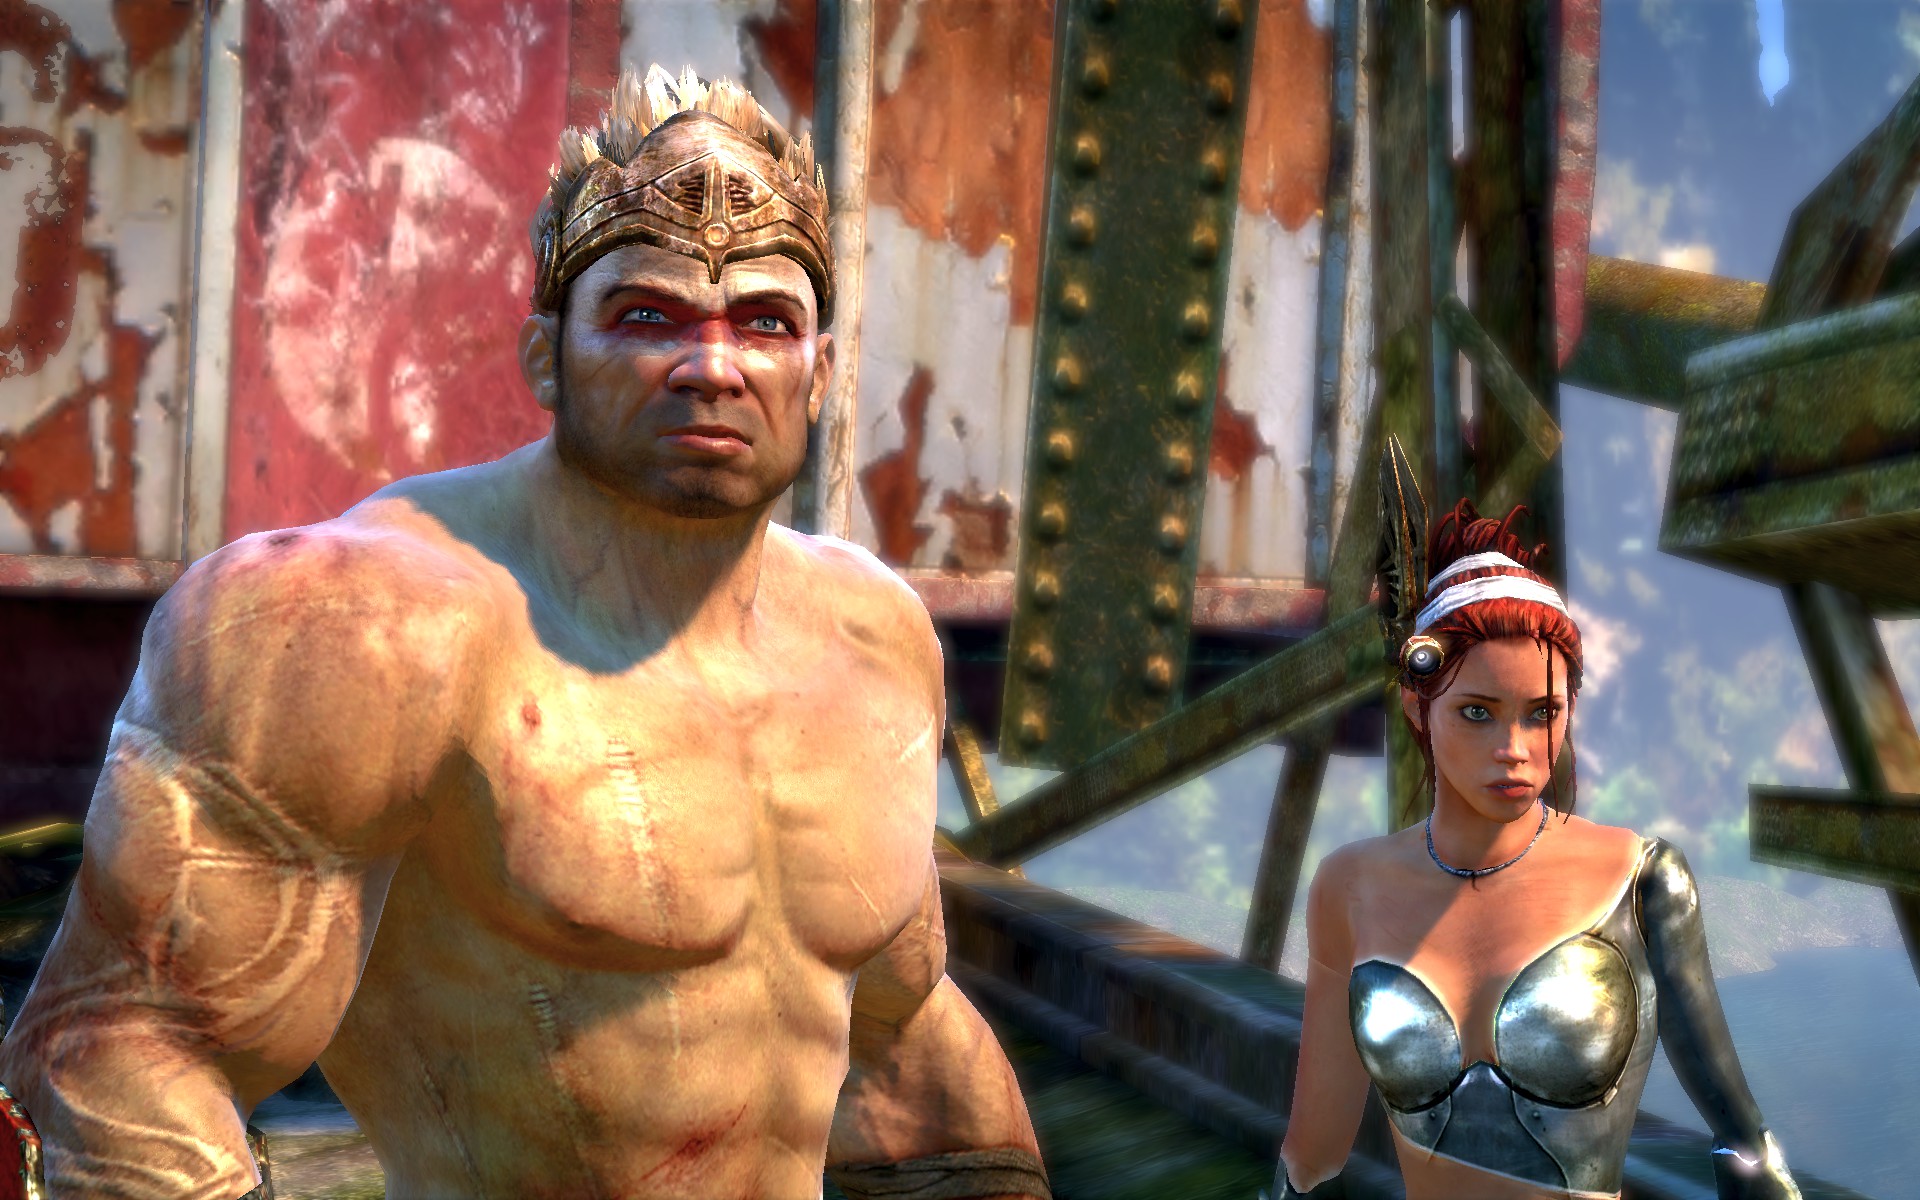 download enslaved odyssey to the west metacritic